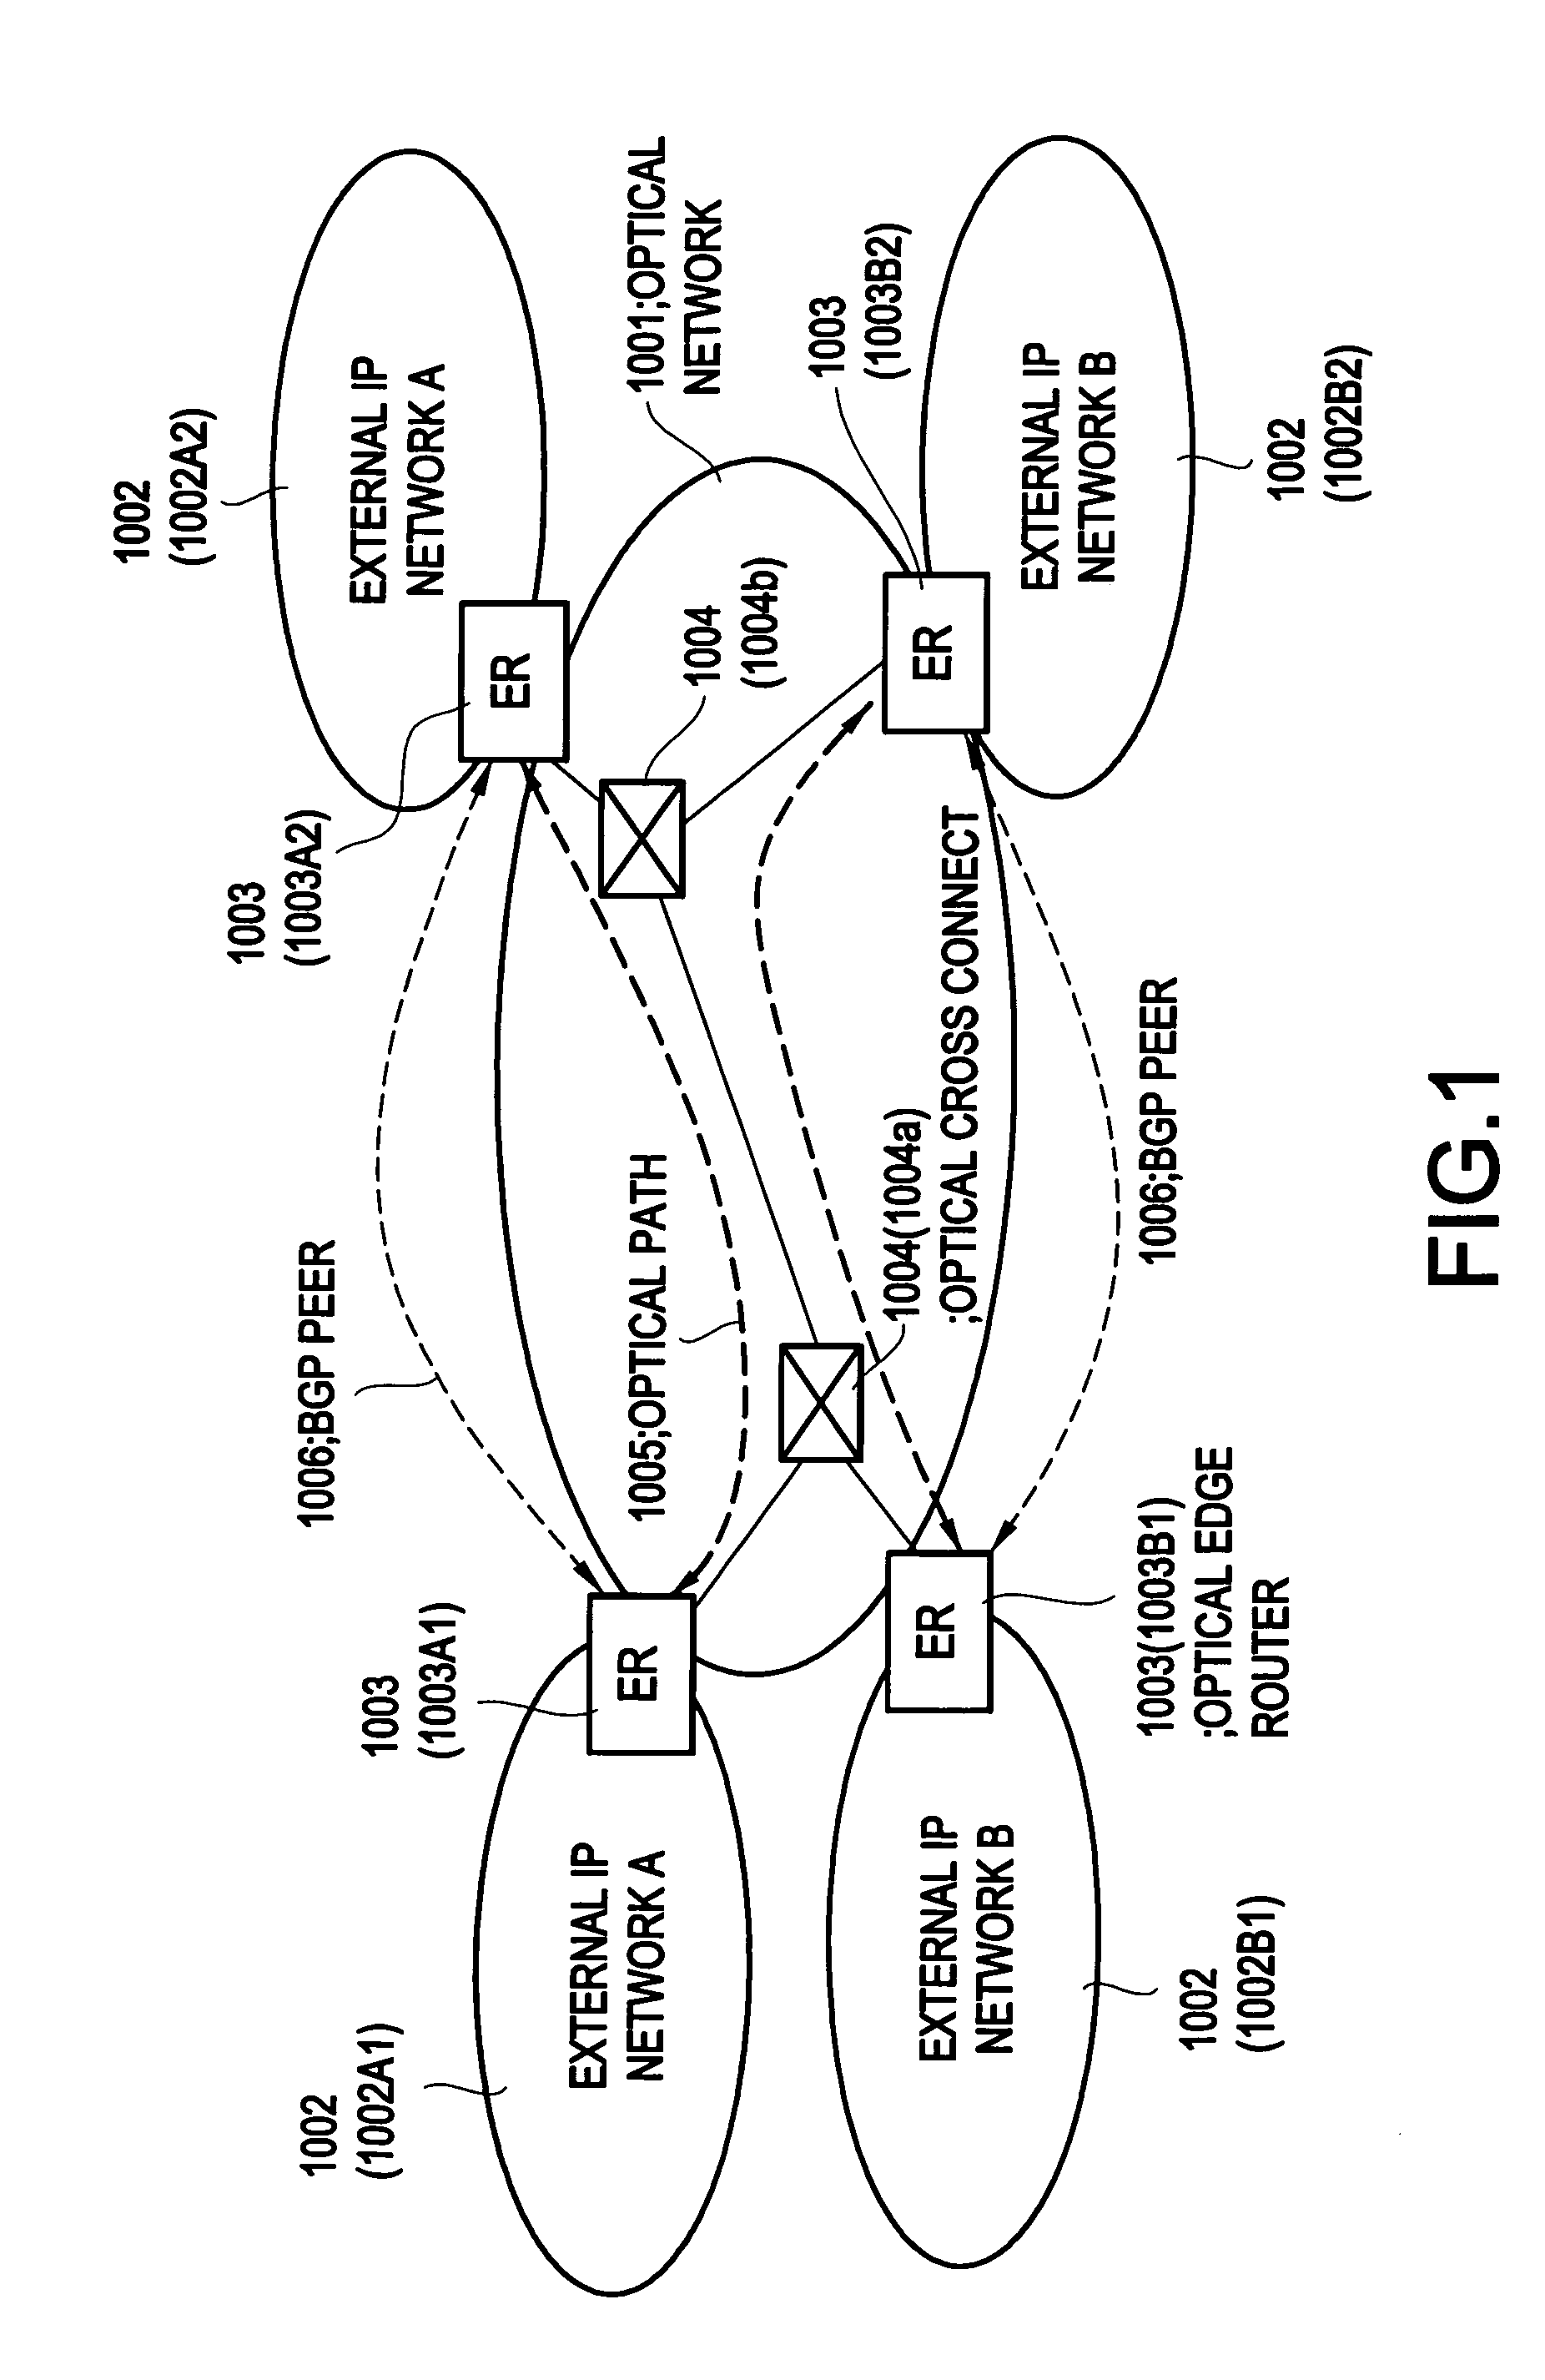 Network element providing an interworking function between plural networks, and system and method including the network element